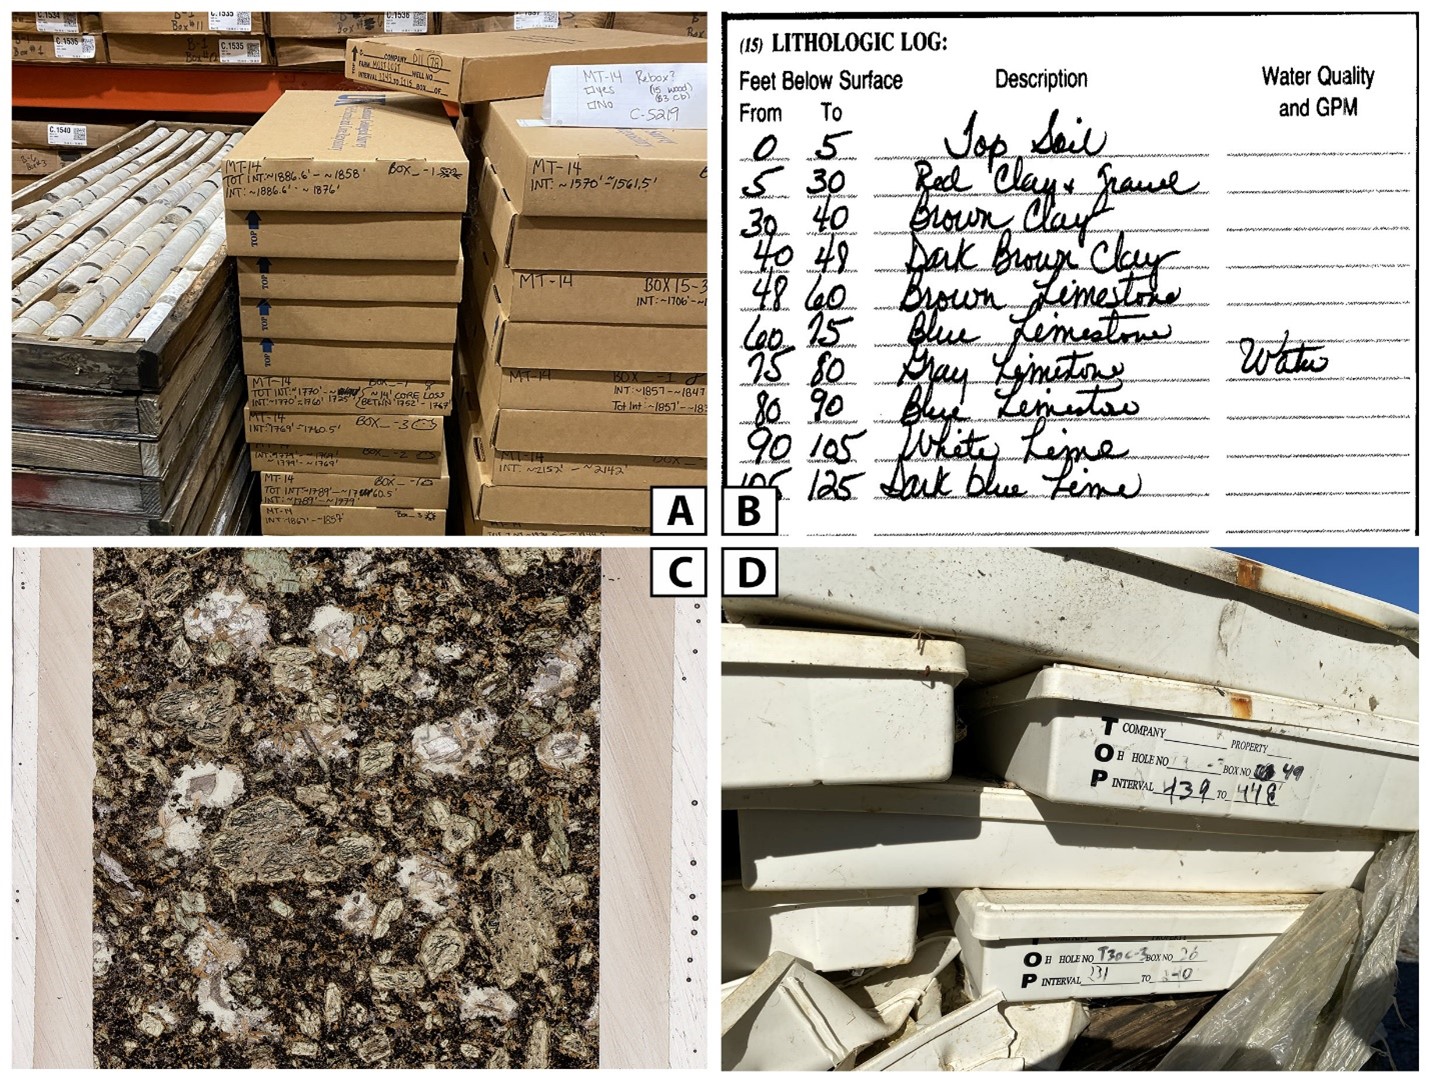 (A) Mineral exploration core from the South-Central Kentucky Mineral District to be photographed. (B) Water-well lithology record. (C) Thin section of dike sample from the Western Kentucky Fluorspar District. (D) Damaged core boxes and faded labels are indicative of the condition of the Tabb Fault System cores.